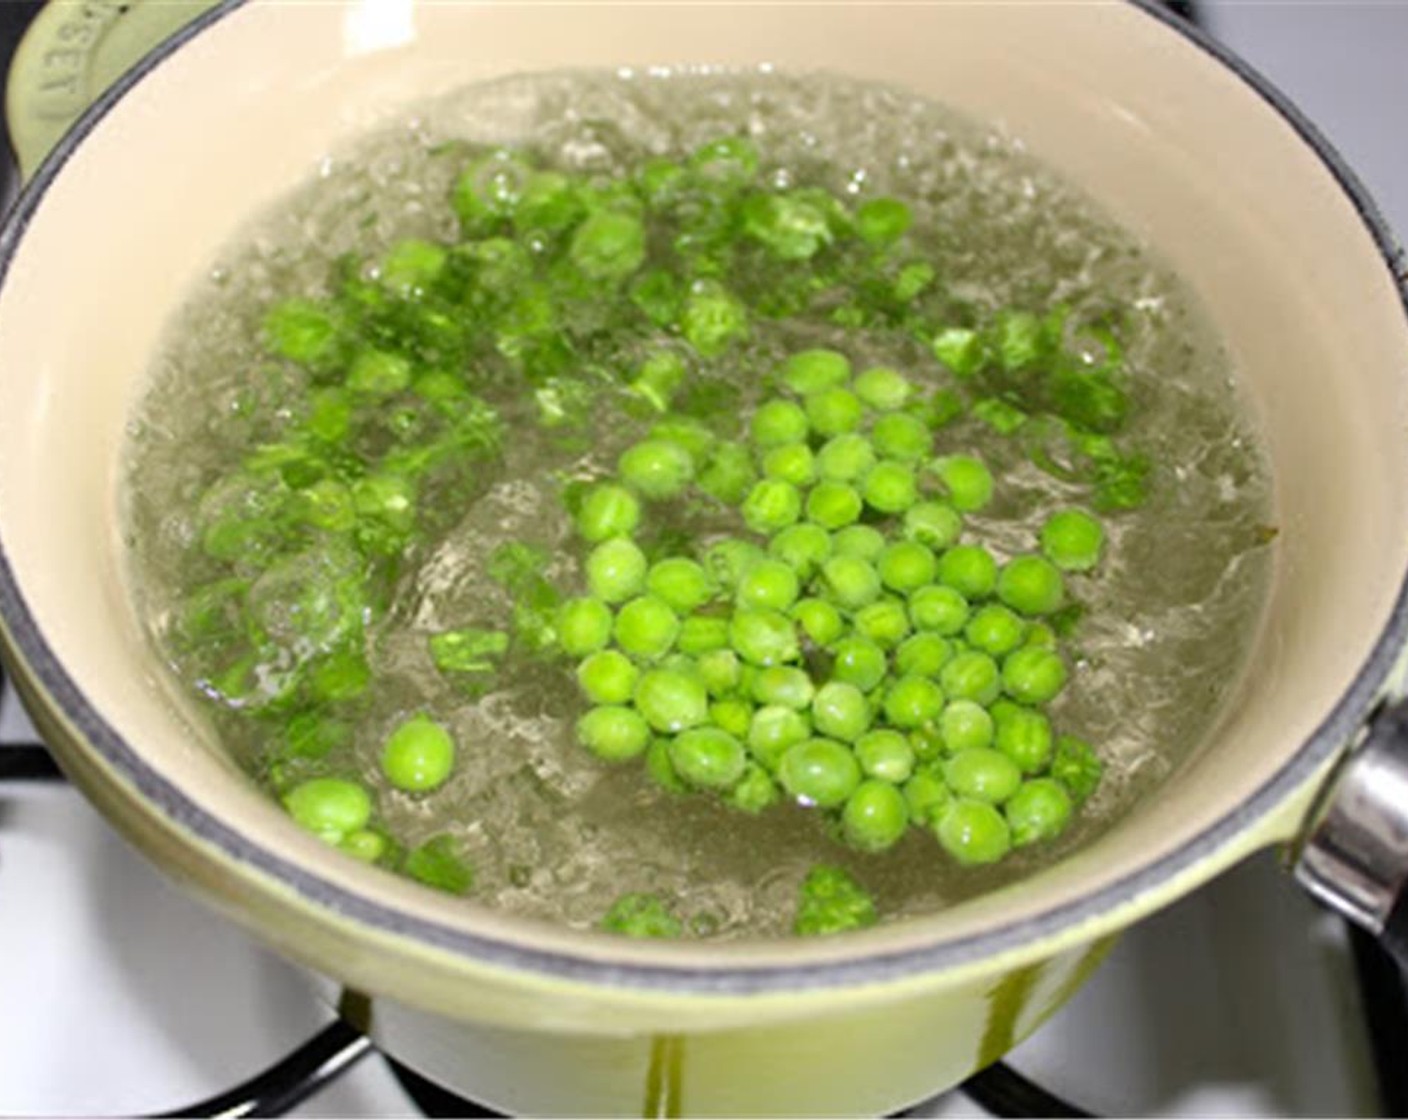 step 2 Start by blanching the  Shelled Fresh Peas (1/2 cup). If you don’t know what blanching is, don’t panic. That’s why I’m here: Bring a small pot of water to a boil. Add the peas and cook for 1 minute.